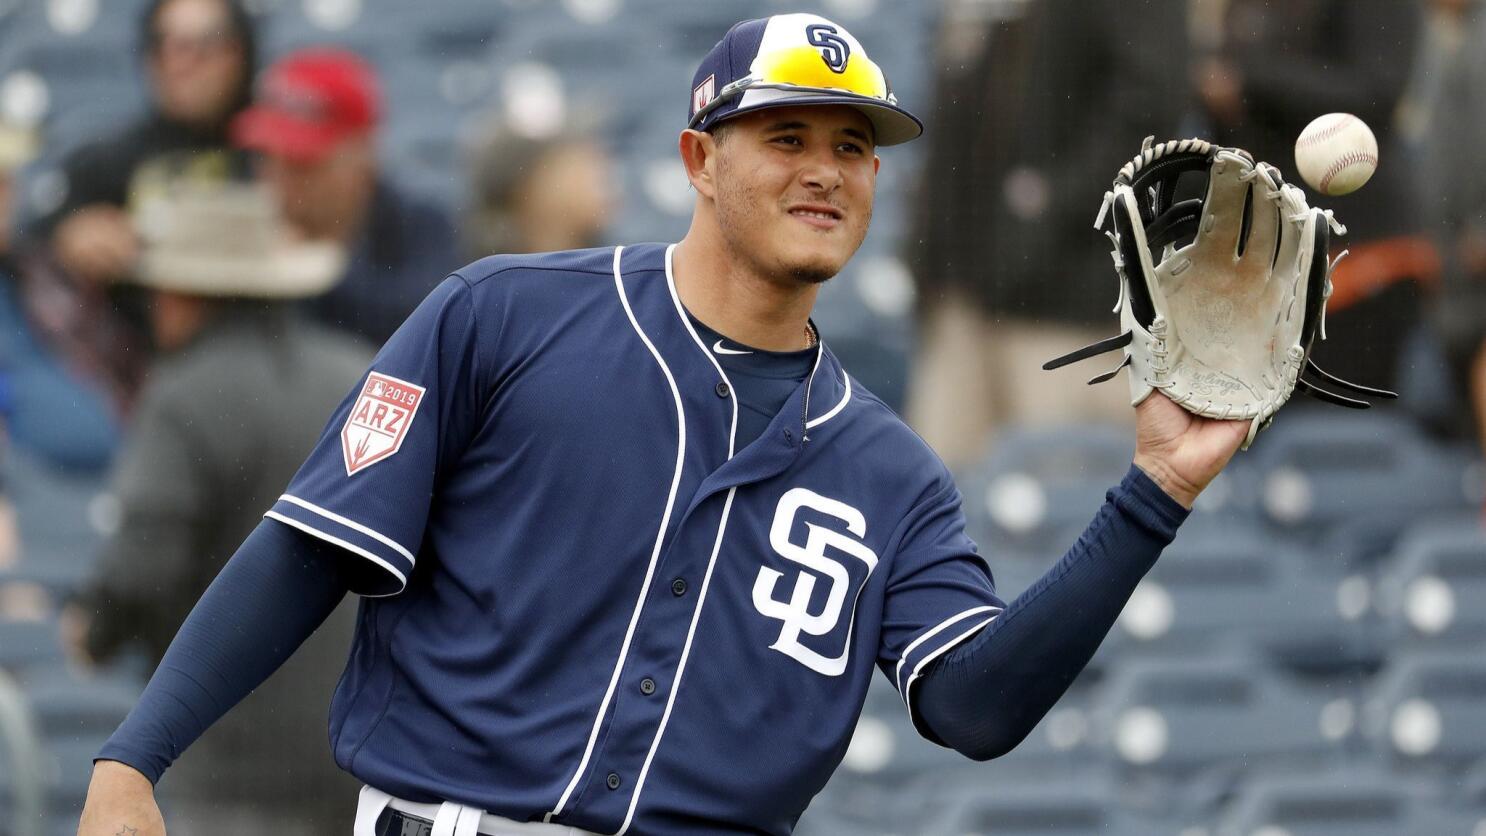 Padres' Fernando Tatis Jr. and Manny Machado say they're moving on from  dust-up: 'It's part of baseball' 